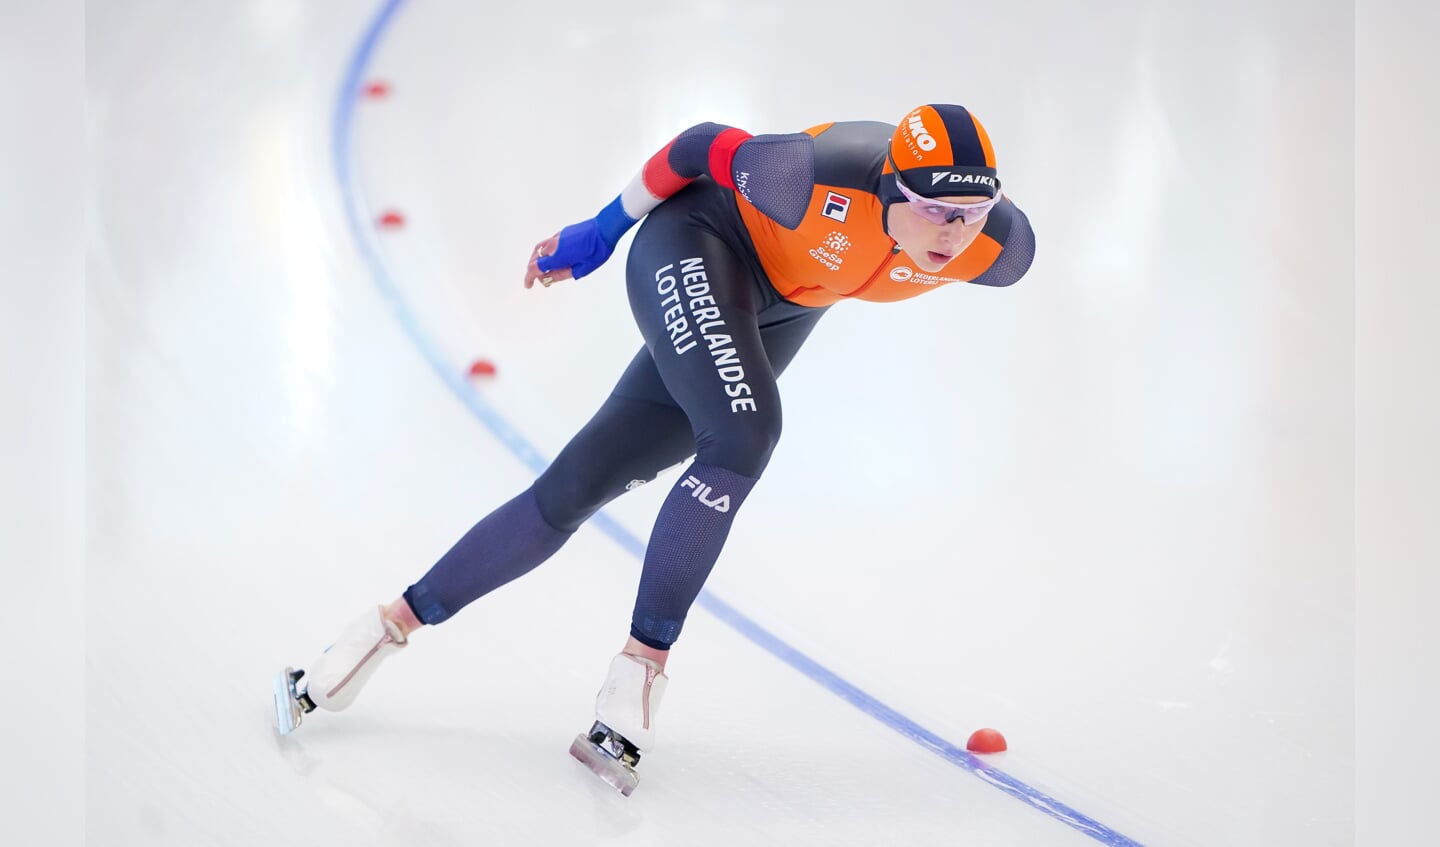 INZELL, GERMANY - MARCH 9: Joy Beune of The Netherlands competing on the Women's 3000m during the ISU World Speed Skating Allround Championships at Max Aicher Arena on March 9, 2024 in Inzell, Germany. (Photo by Douwe Bijlsma/Orange Pictures)